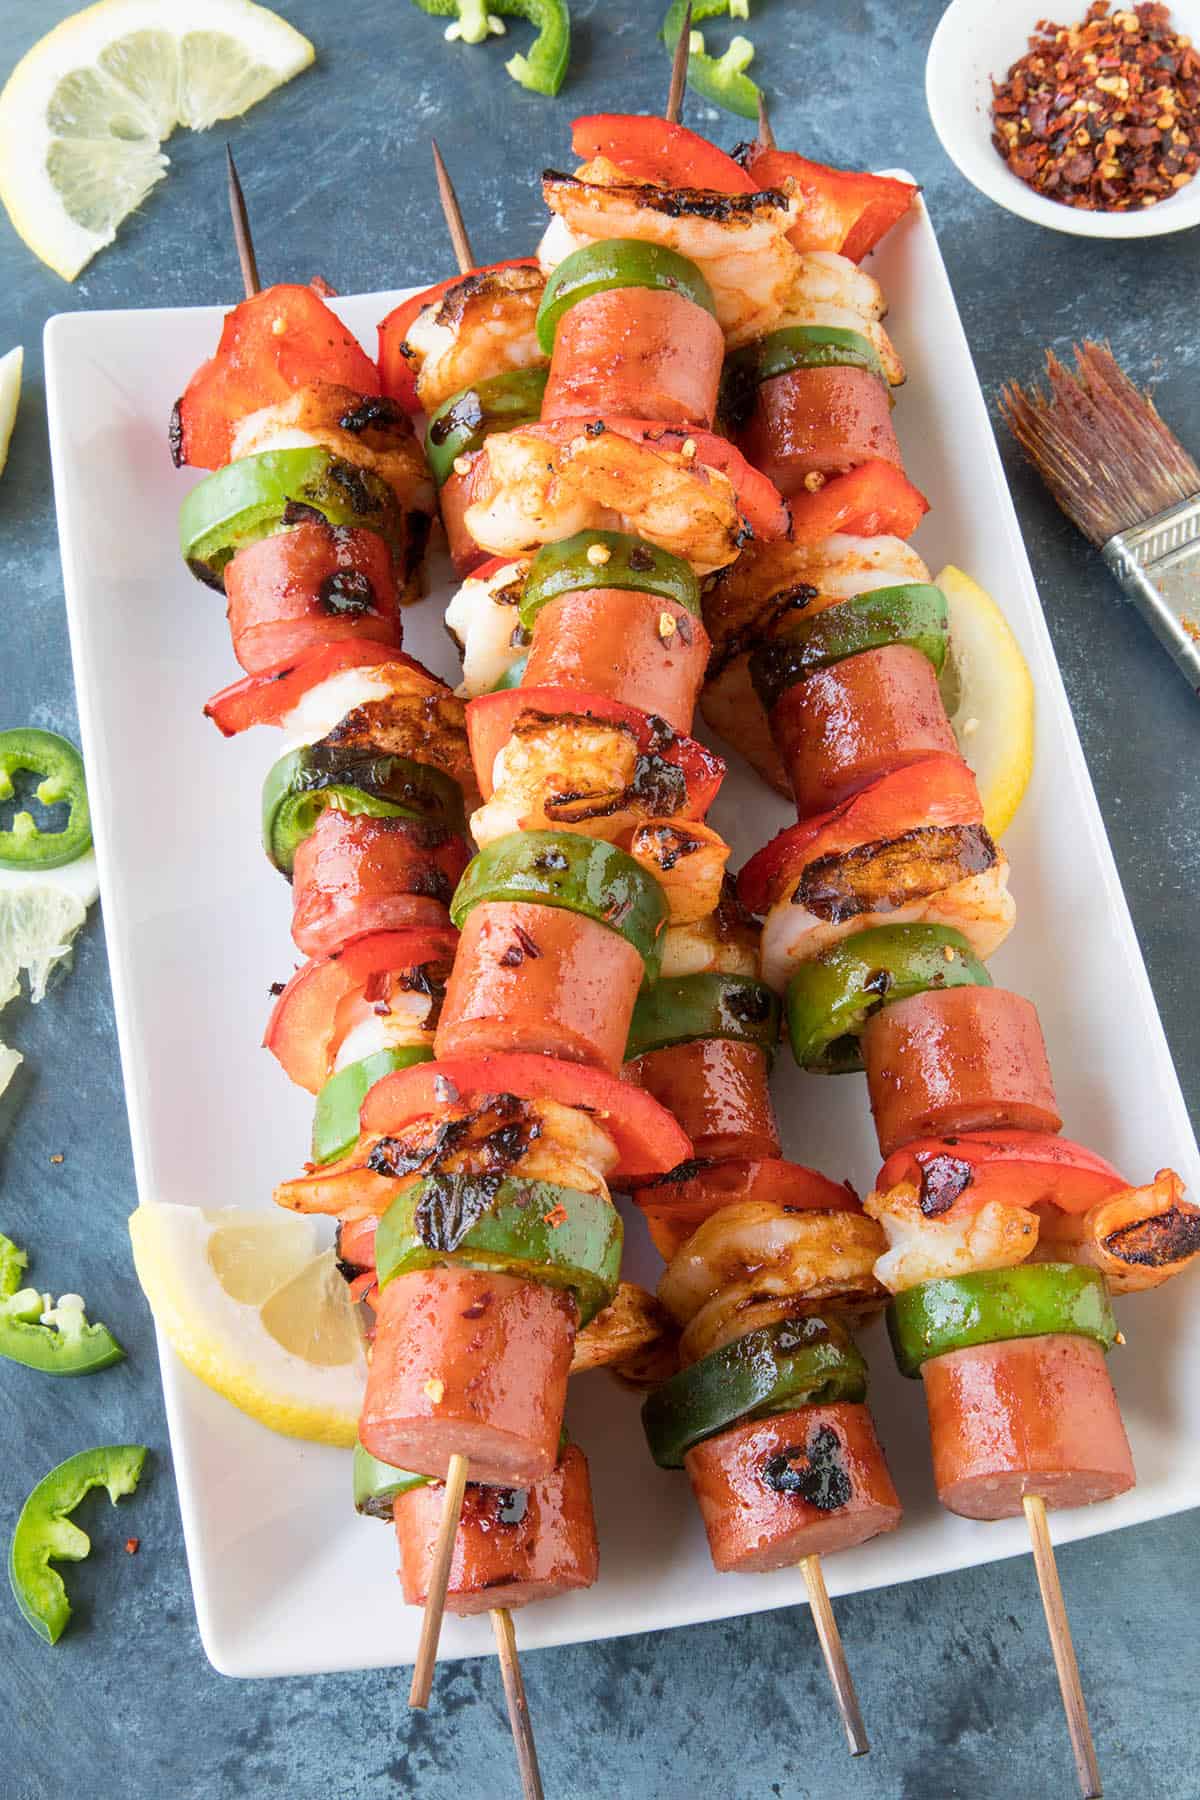 10 Minute Shrimp and Sausage Skewers - Served and Ready to Eat.